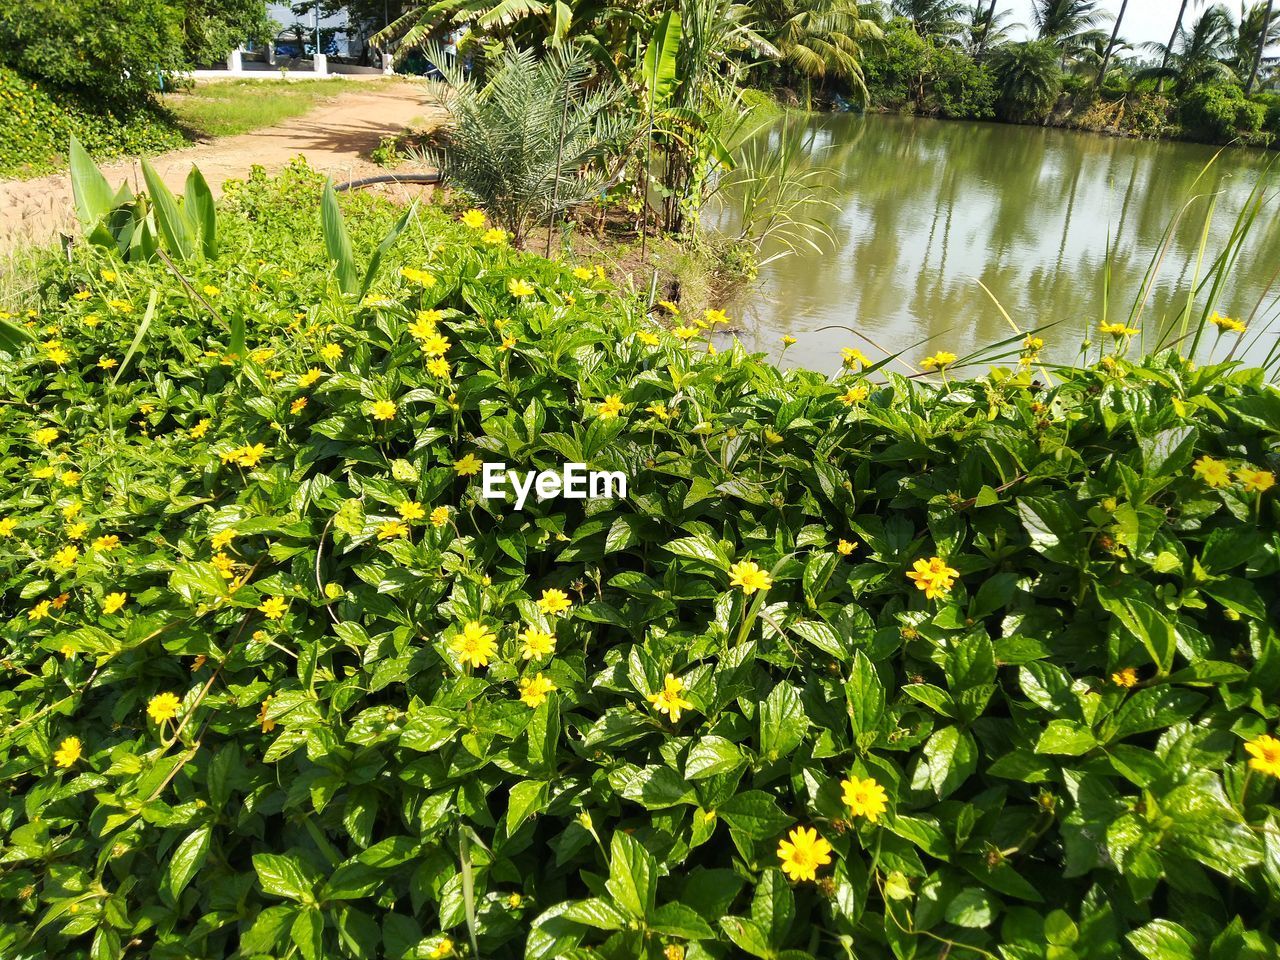 PLANTS AND LAKE IN PARK